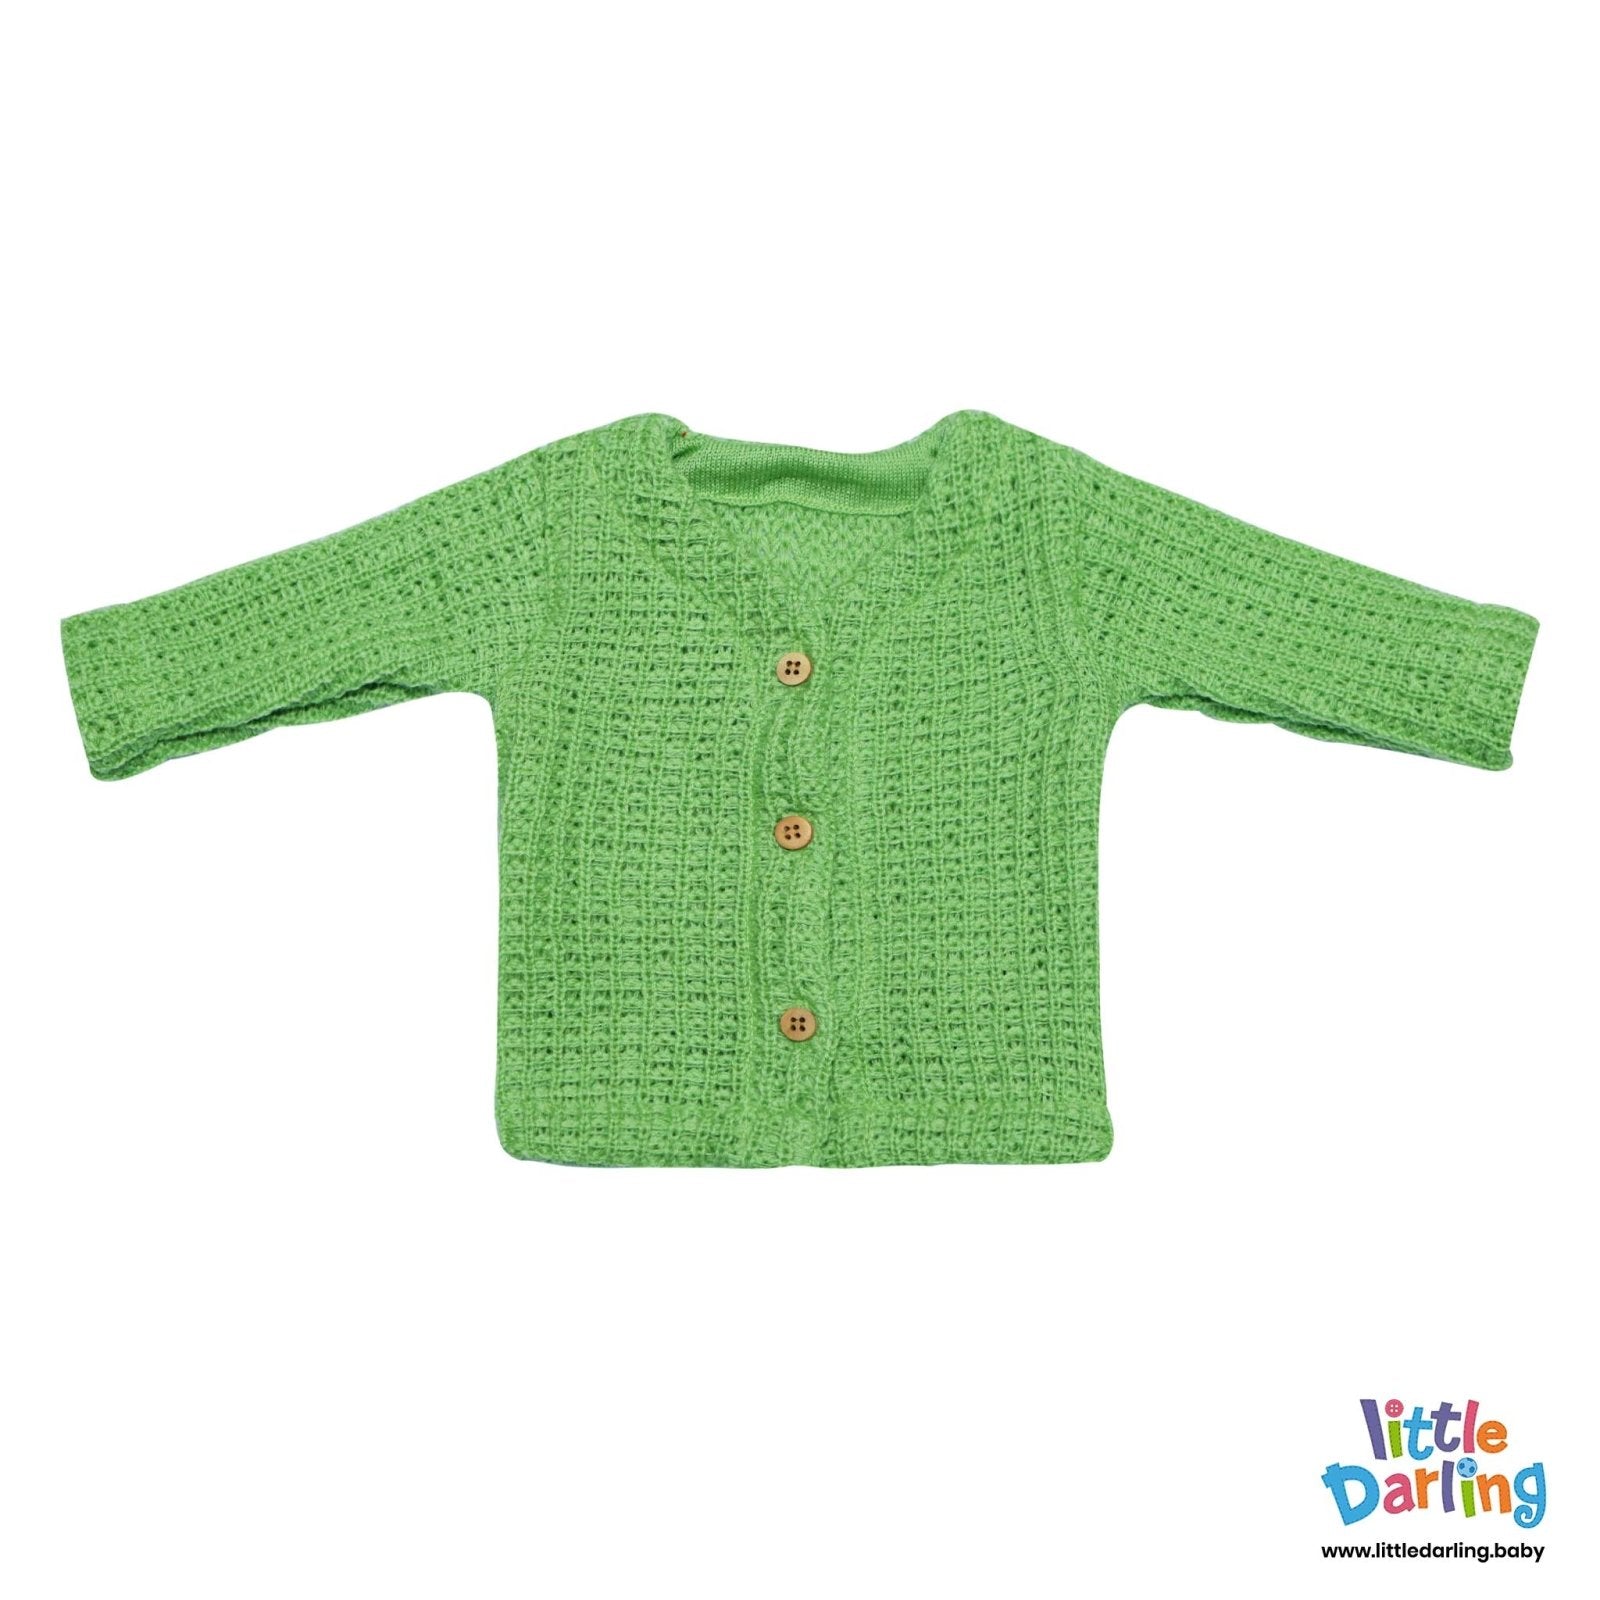 4 Pcs Woolen Gift Set Knitting Green Color by Little Darling